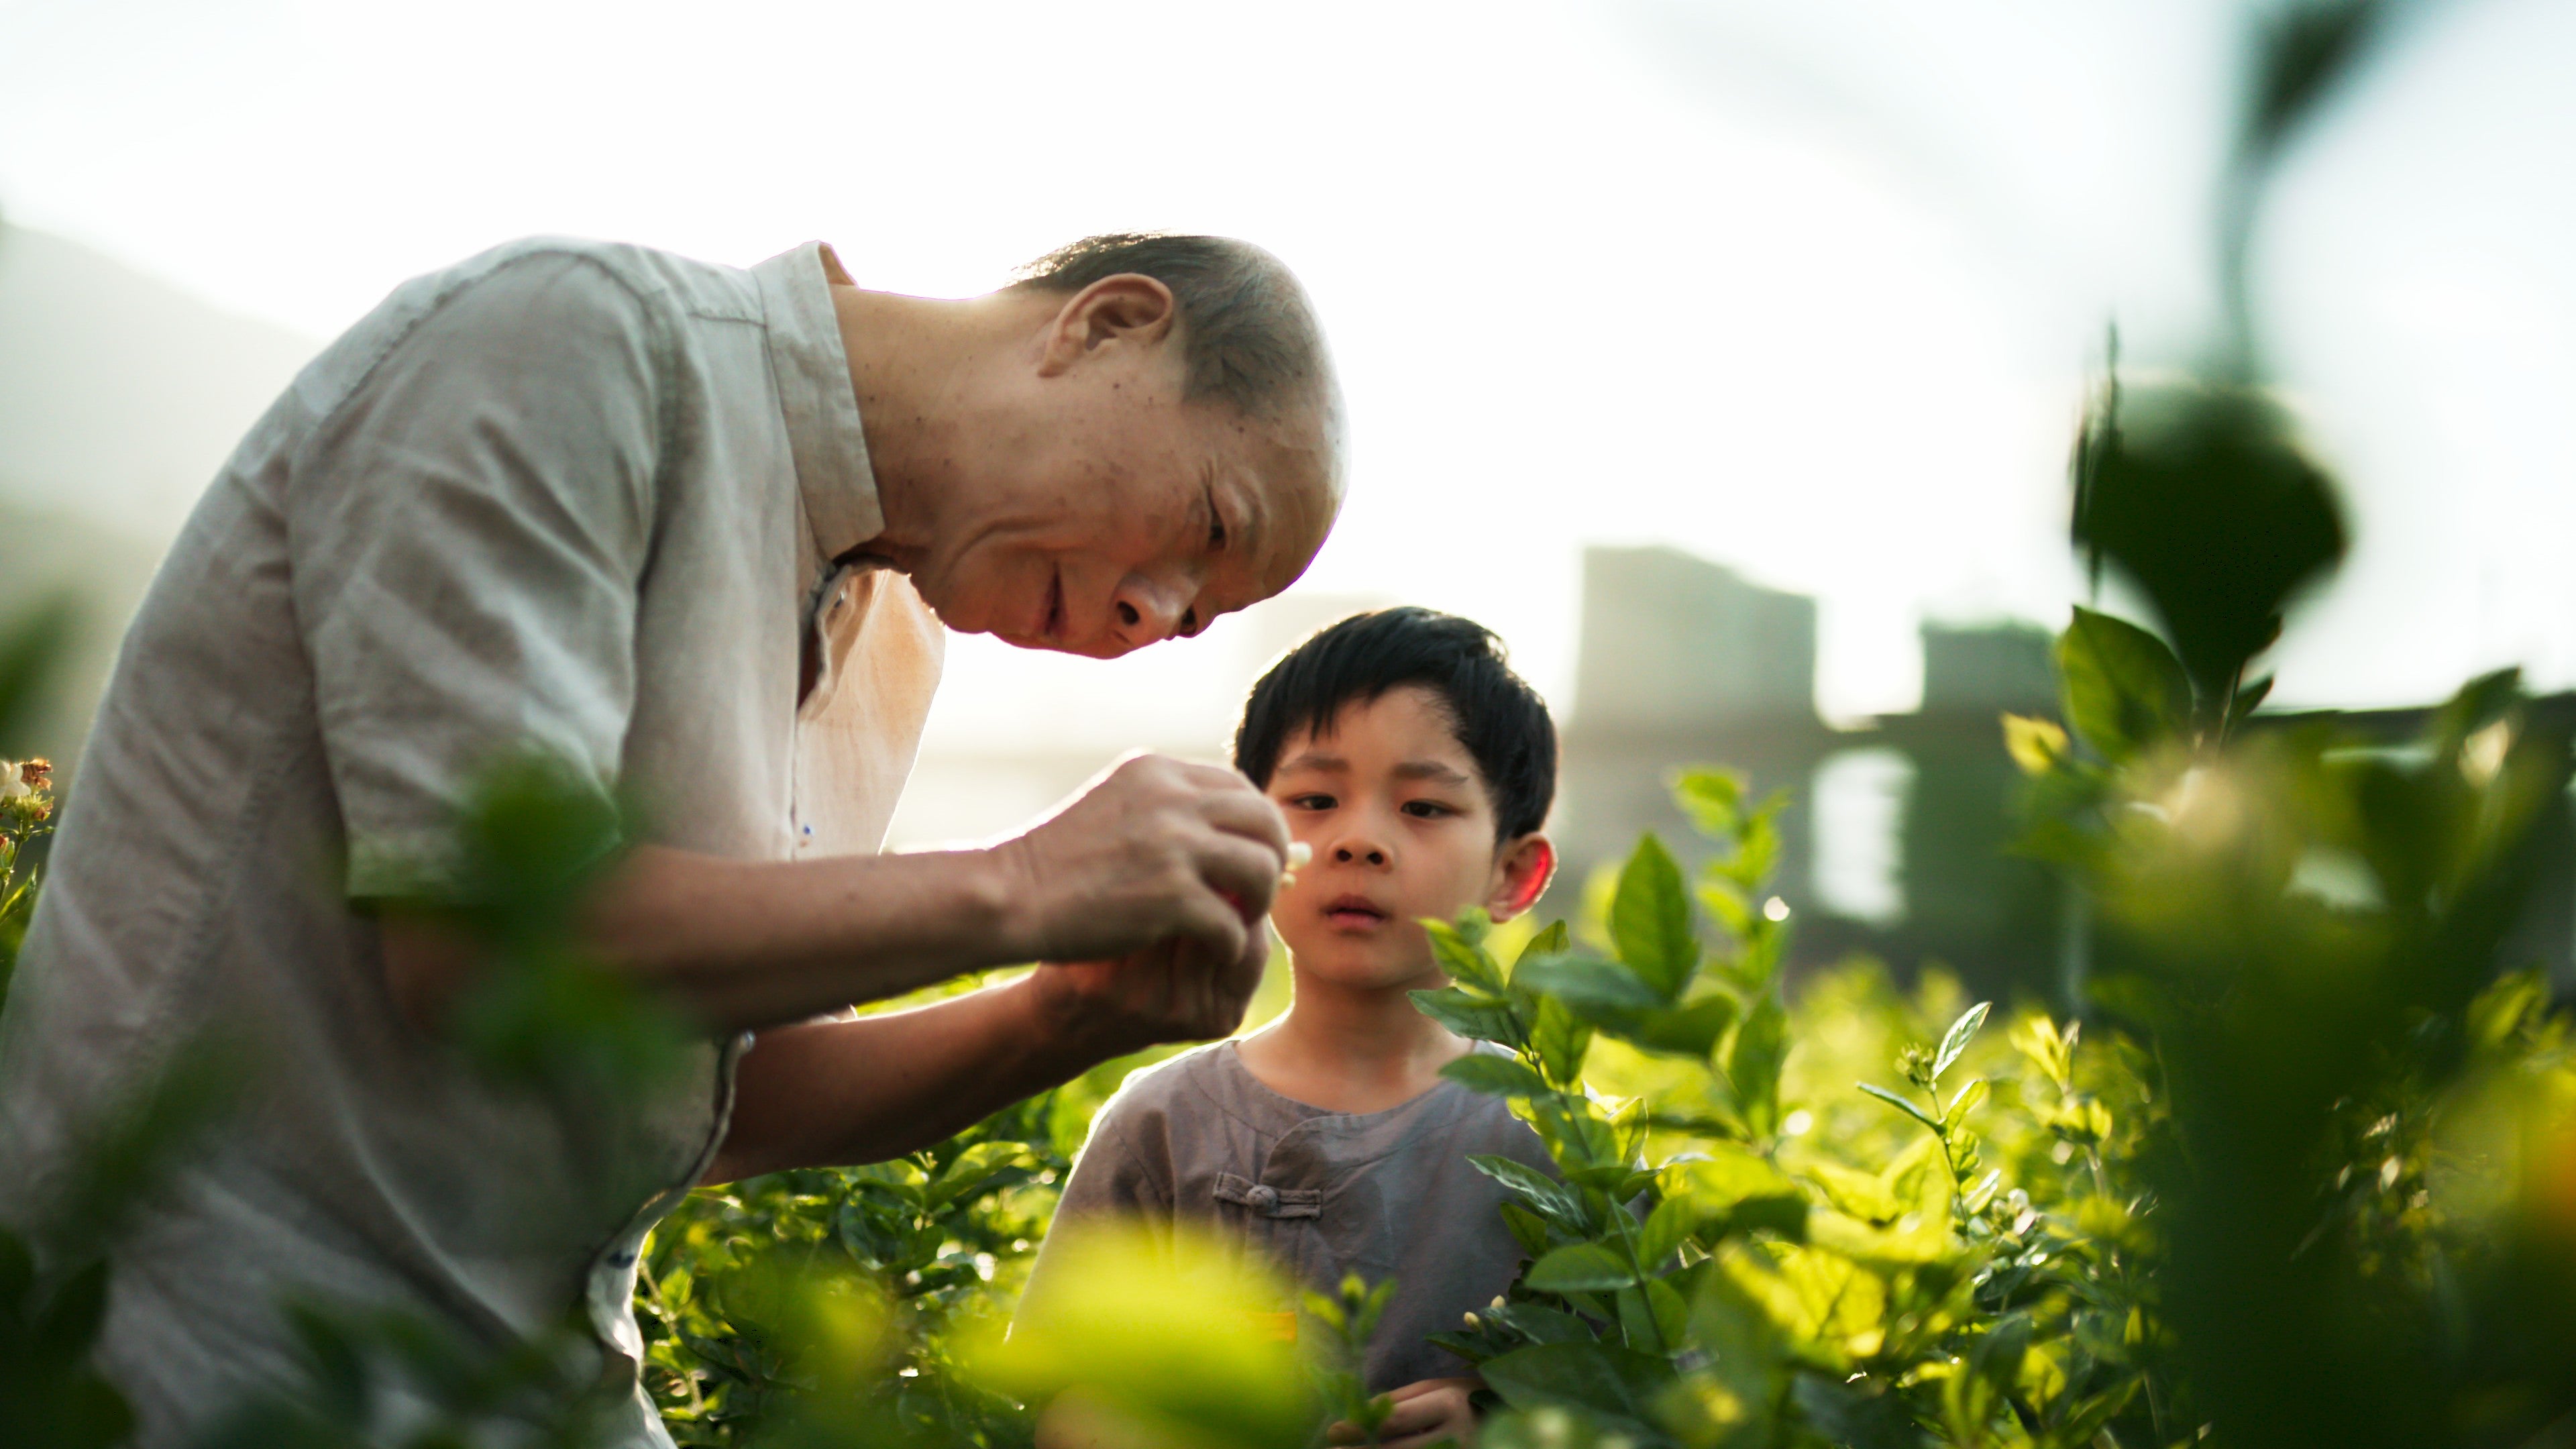 A jasmine tea maker from Fuzhou, Fujian province, tells his grandson the right time to pick the flowers